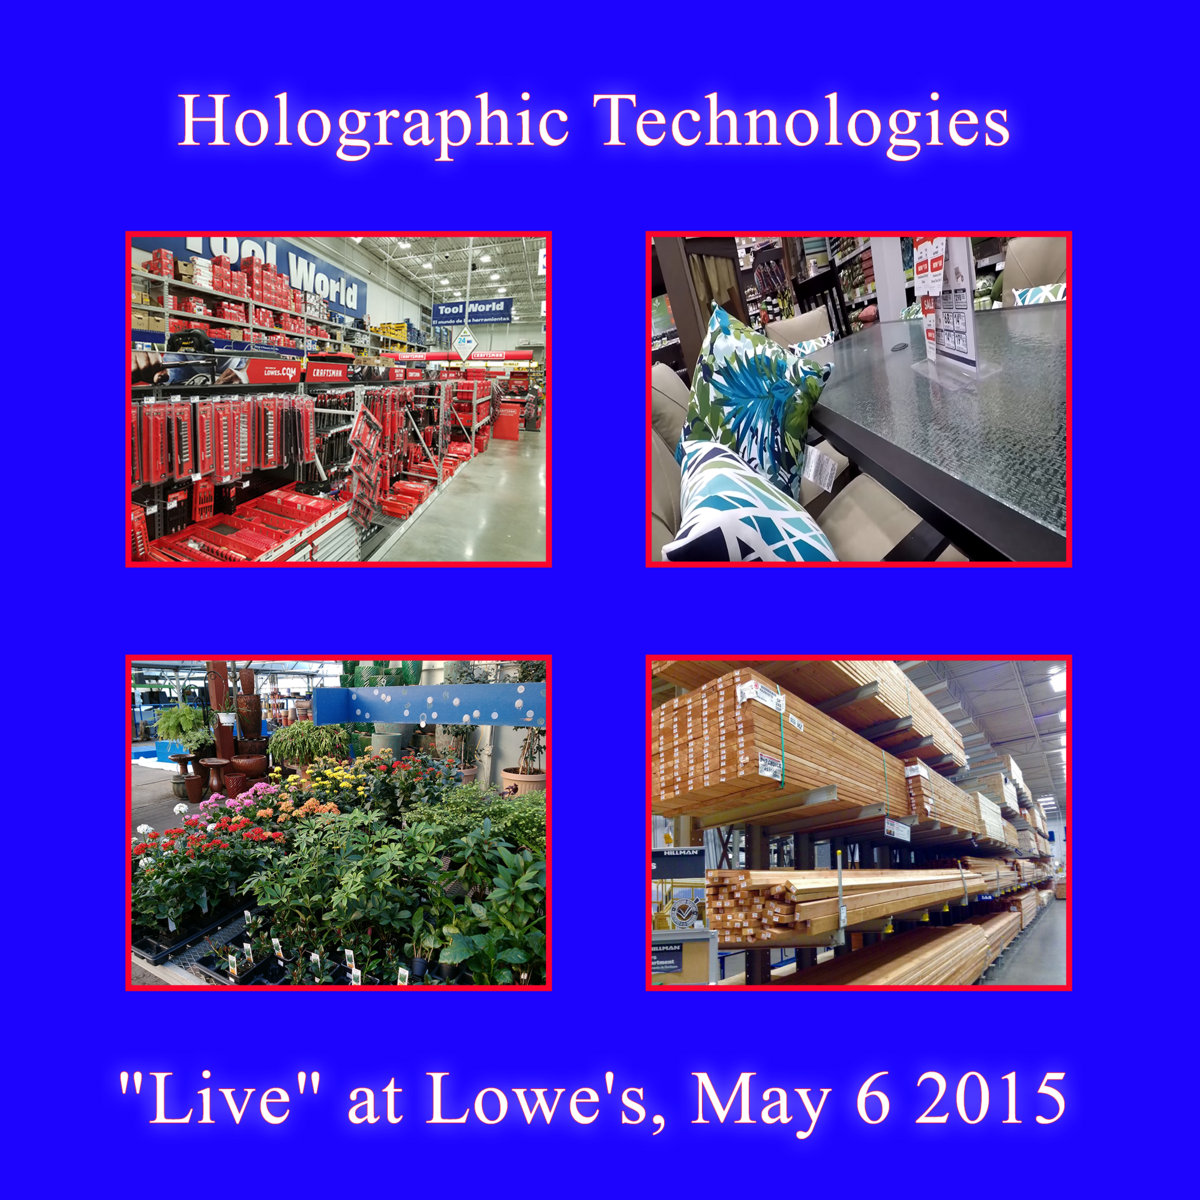 Live at Lowe's Holographic Technologies